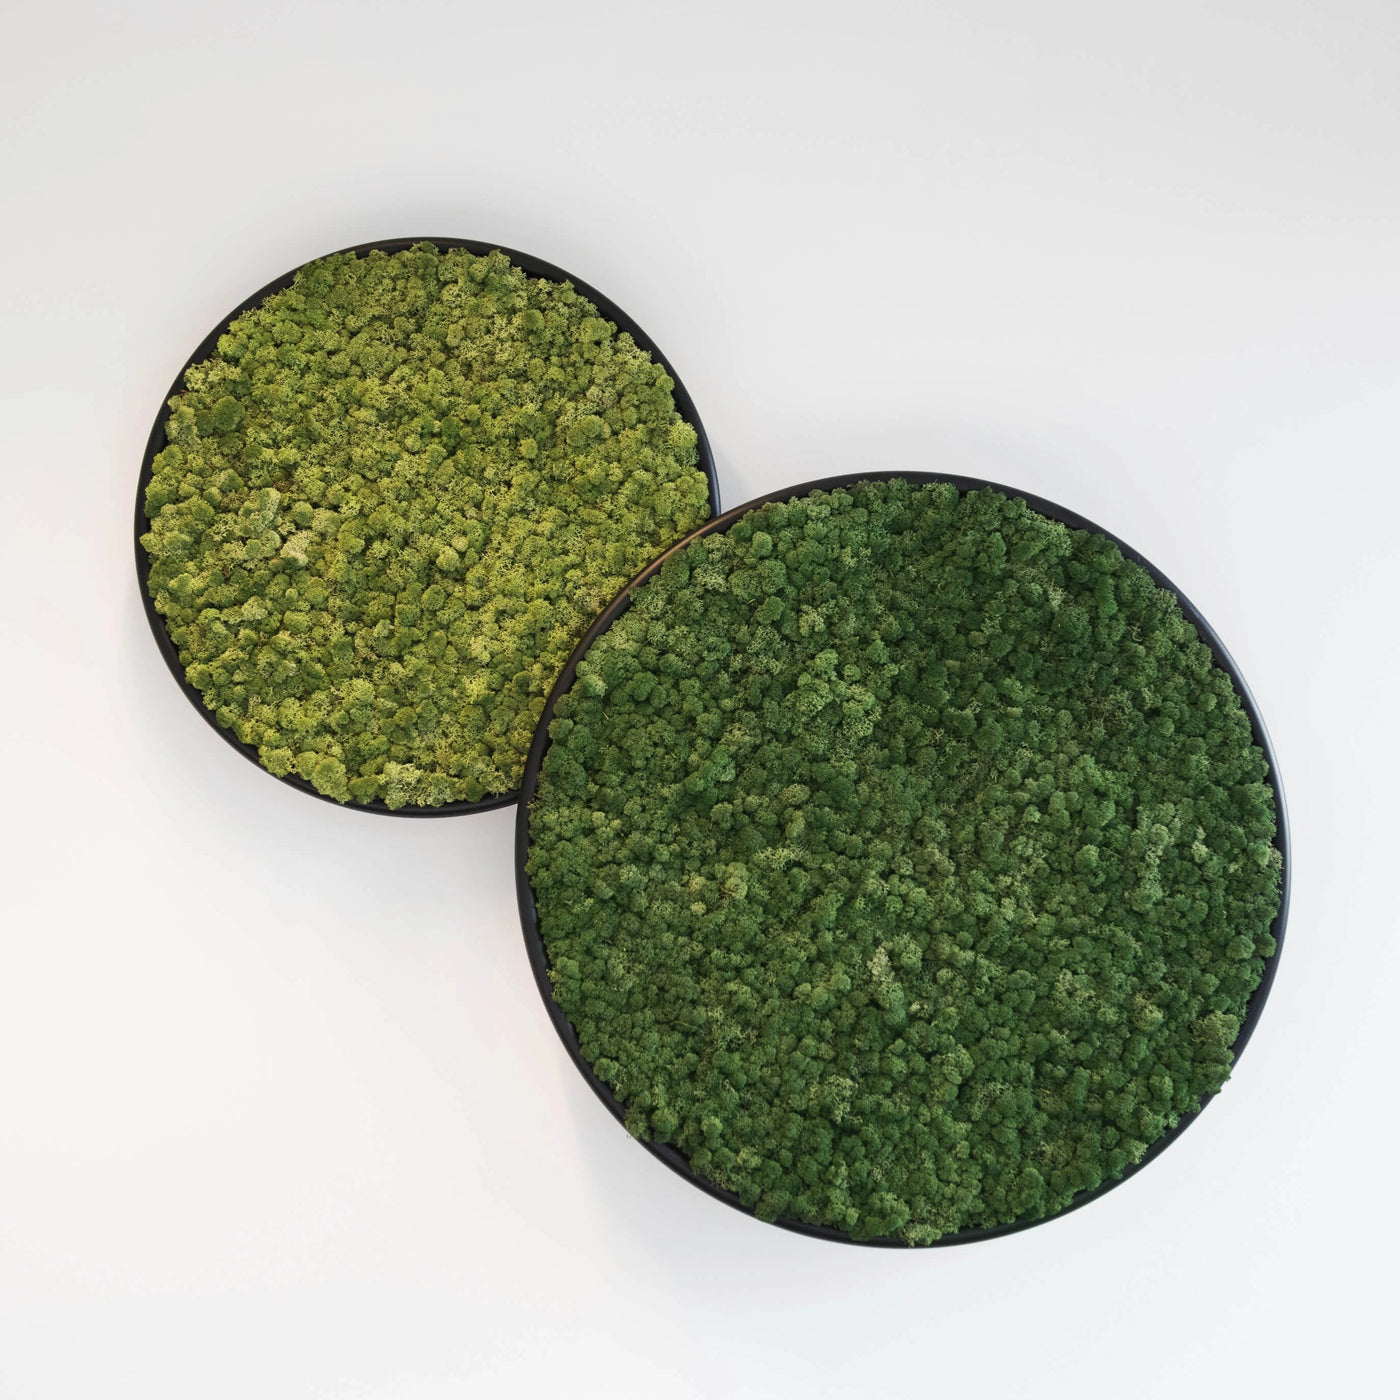 Plant and Moss Circles-Wall Decor-LIVING MOSS WALL, MOSS FRAMES, MOSS PICTURES, MOSS WALL ART, PLANT WALL ART, PLANTS-Forest Homes-Nature inspired decor-Nature decor